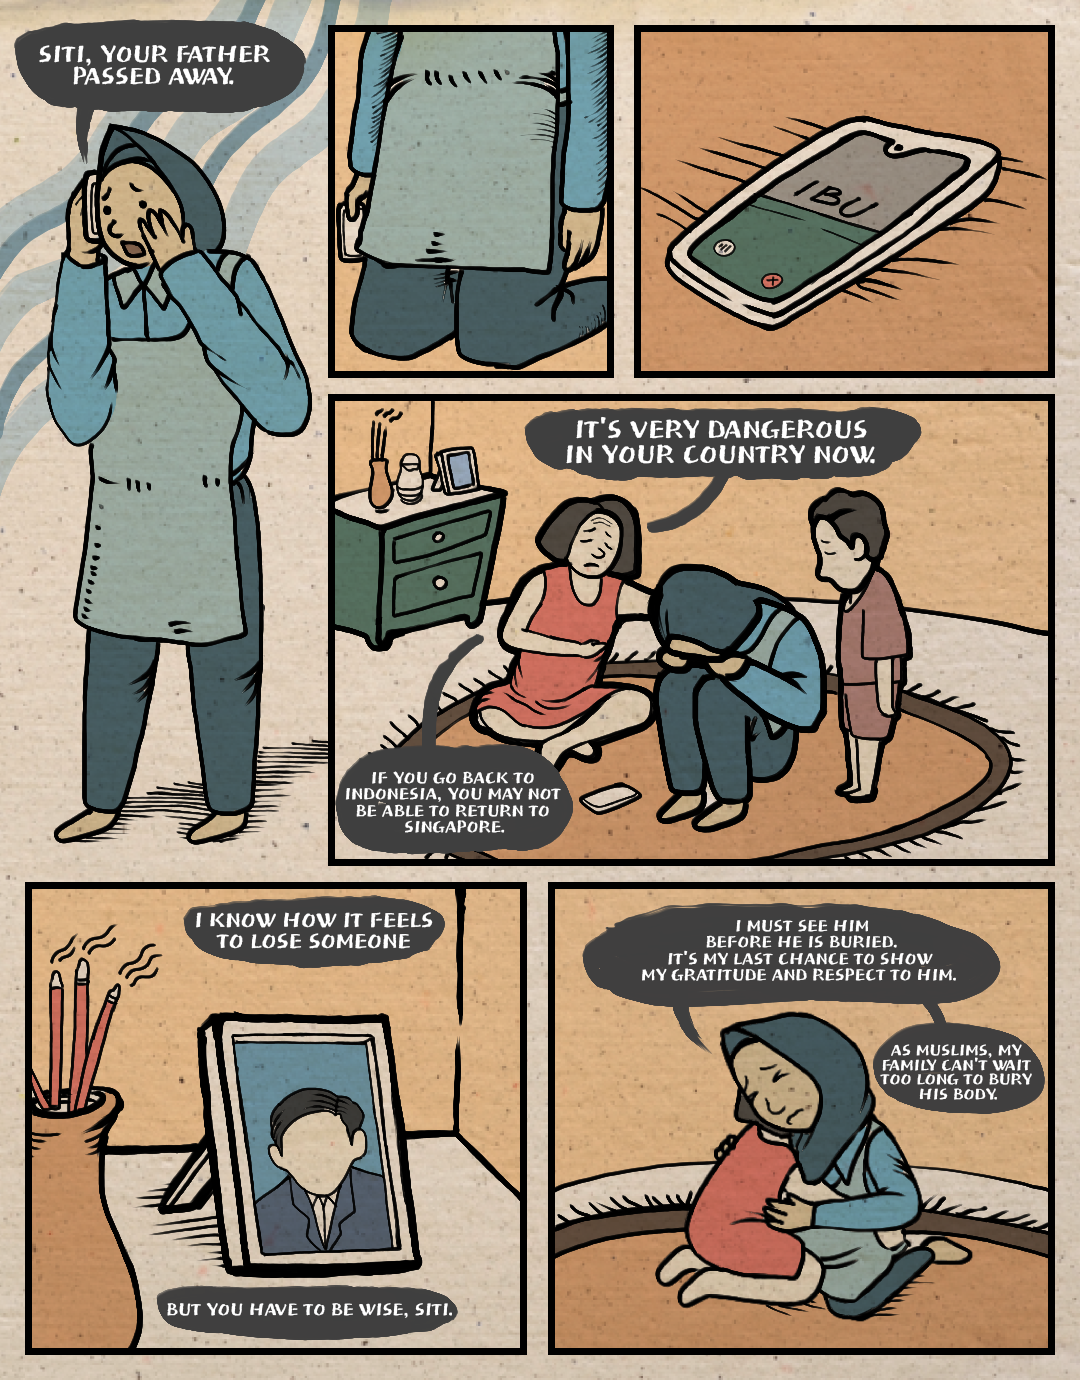 Page 1. A comic page of six panels in full colour, with black lines.
Panel 1: Siti, a migrant worker, receives a call from her mother in Tegal, Central Java. She covers her mouth with her hand in surprise. Mother: “Siti, your father passed away.”
Panel 2: Siti falls to her knees in shock.
Panel 3: Close-up of Siti’s phone, now on the floor.
Panel 4: Siti’s employer, a middle-aged woman, and the employer’s child sit beside Siti on the floor. They try to console her. Employer: “It’s very dangerous in your country now. If you go back to Indonesia, you may not be able to return to Singapore.”
Panel 5: Close-up of a photograph of the employer’s deceased husband. Employer: “I know how it feels to lose someone. But you have to be wise, Siti.”
Panel 6: Siti and her employer embrace. Siti: “I must see him before he is buried. It’s my last chance to show my gratitude and respect to him. As Muslims, my family can’t wait too long to bury his body.”
